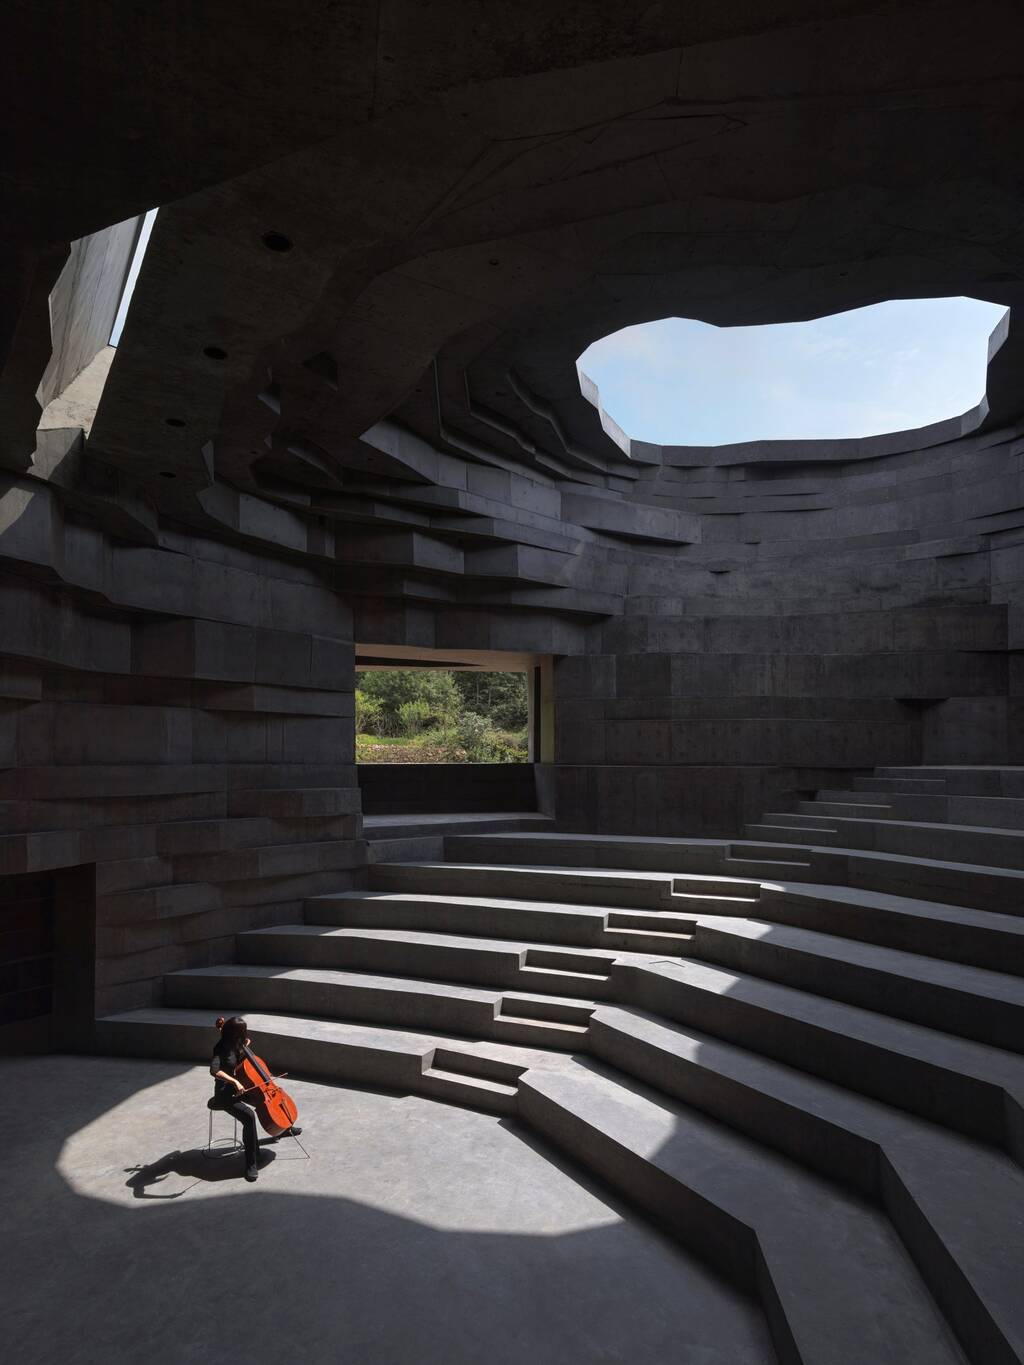 A person sitting on the floor of Chapel of Sound Amphitheatre